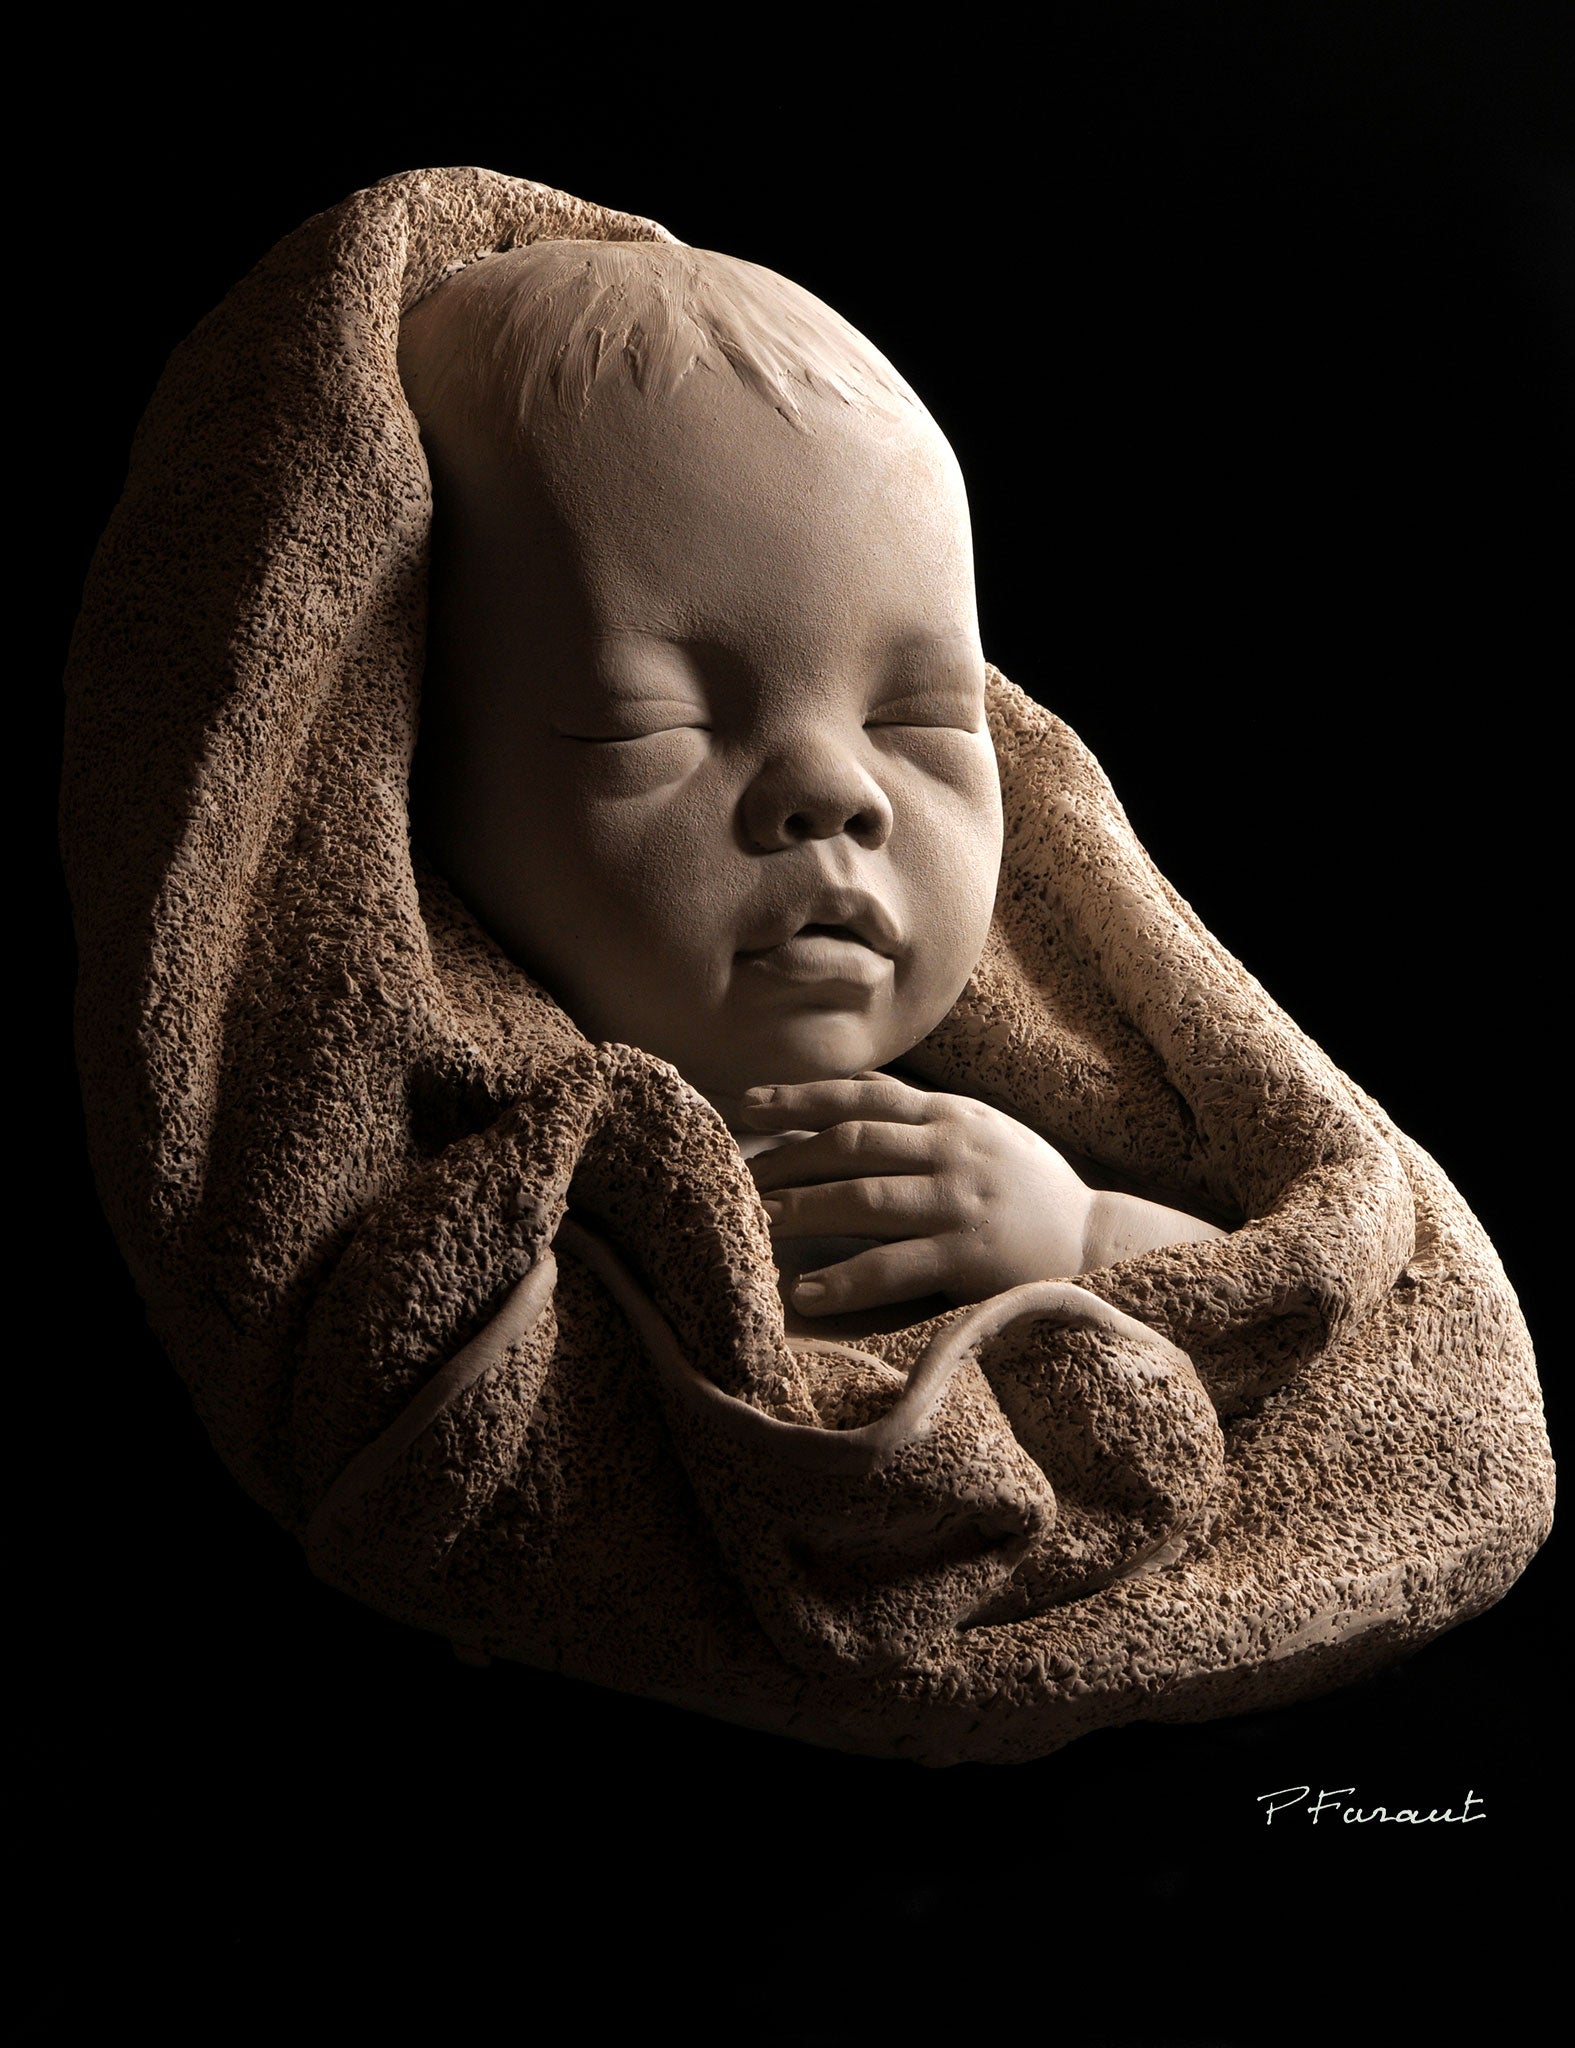 Sleeping baby wrapped in towel sculpture by Philippe Faraut